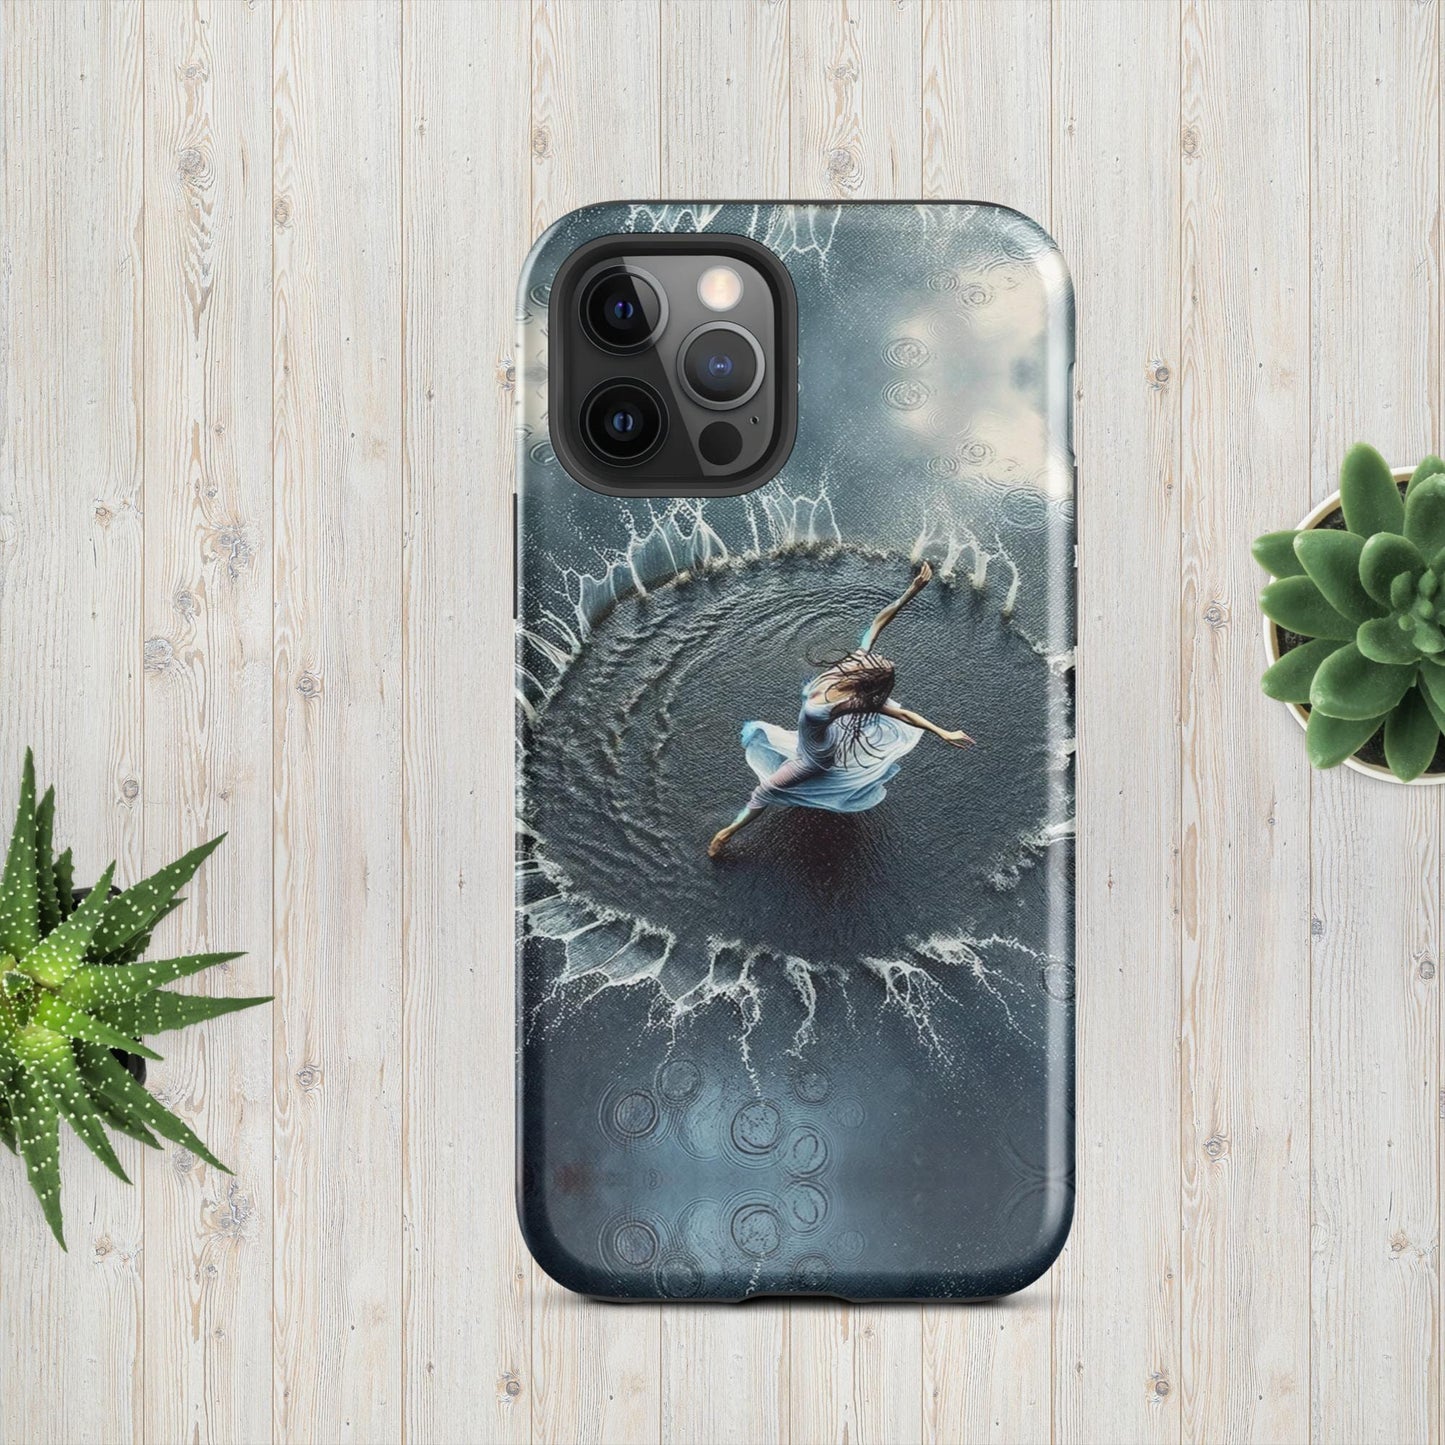 The Hologram Hook Up Glossy / iPhone 12 Pro Puddle Dance Tough Case for iPhone®